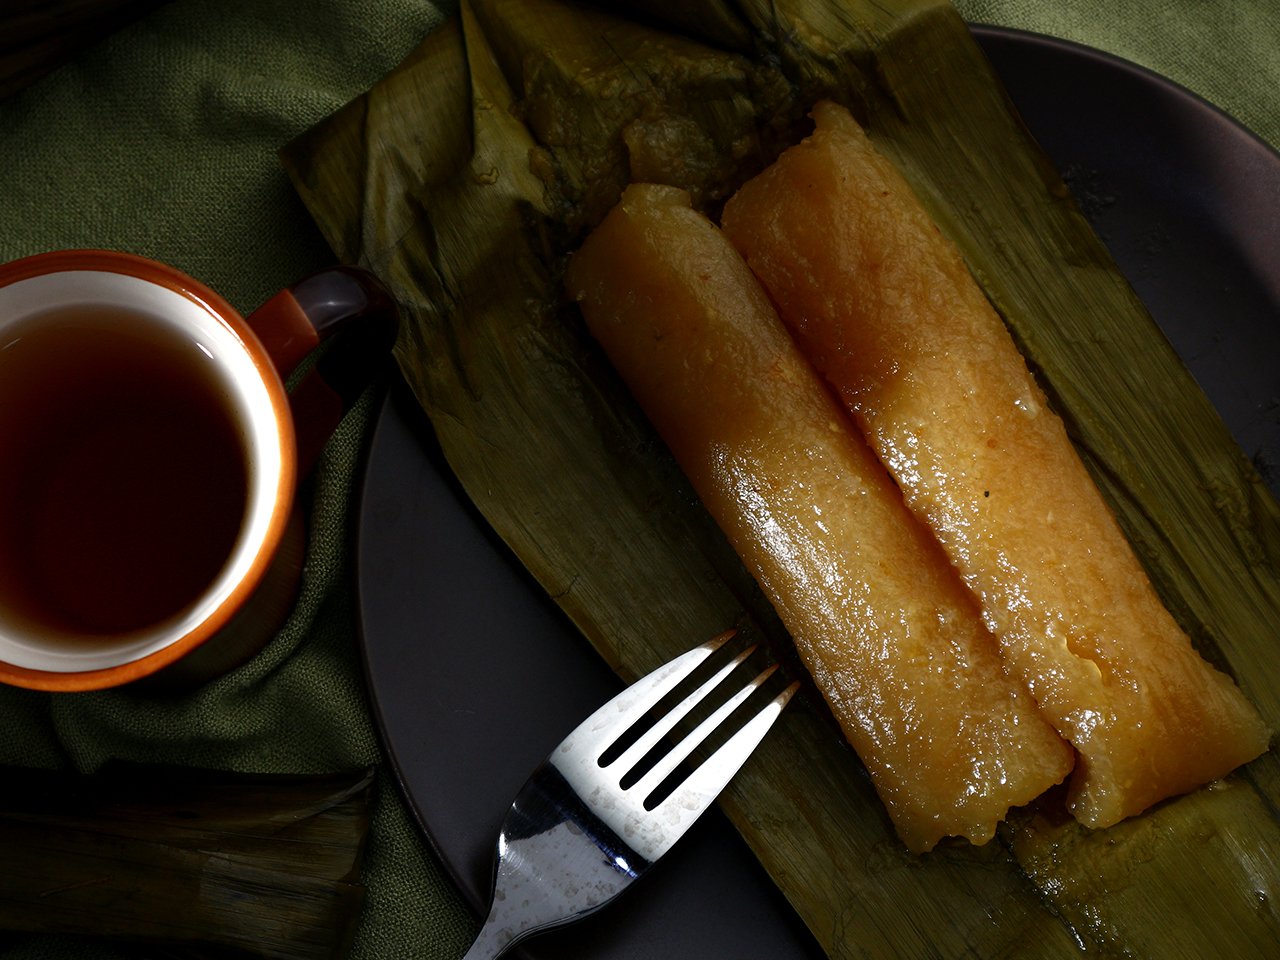 Two pieces of suman on banana leaf